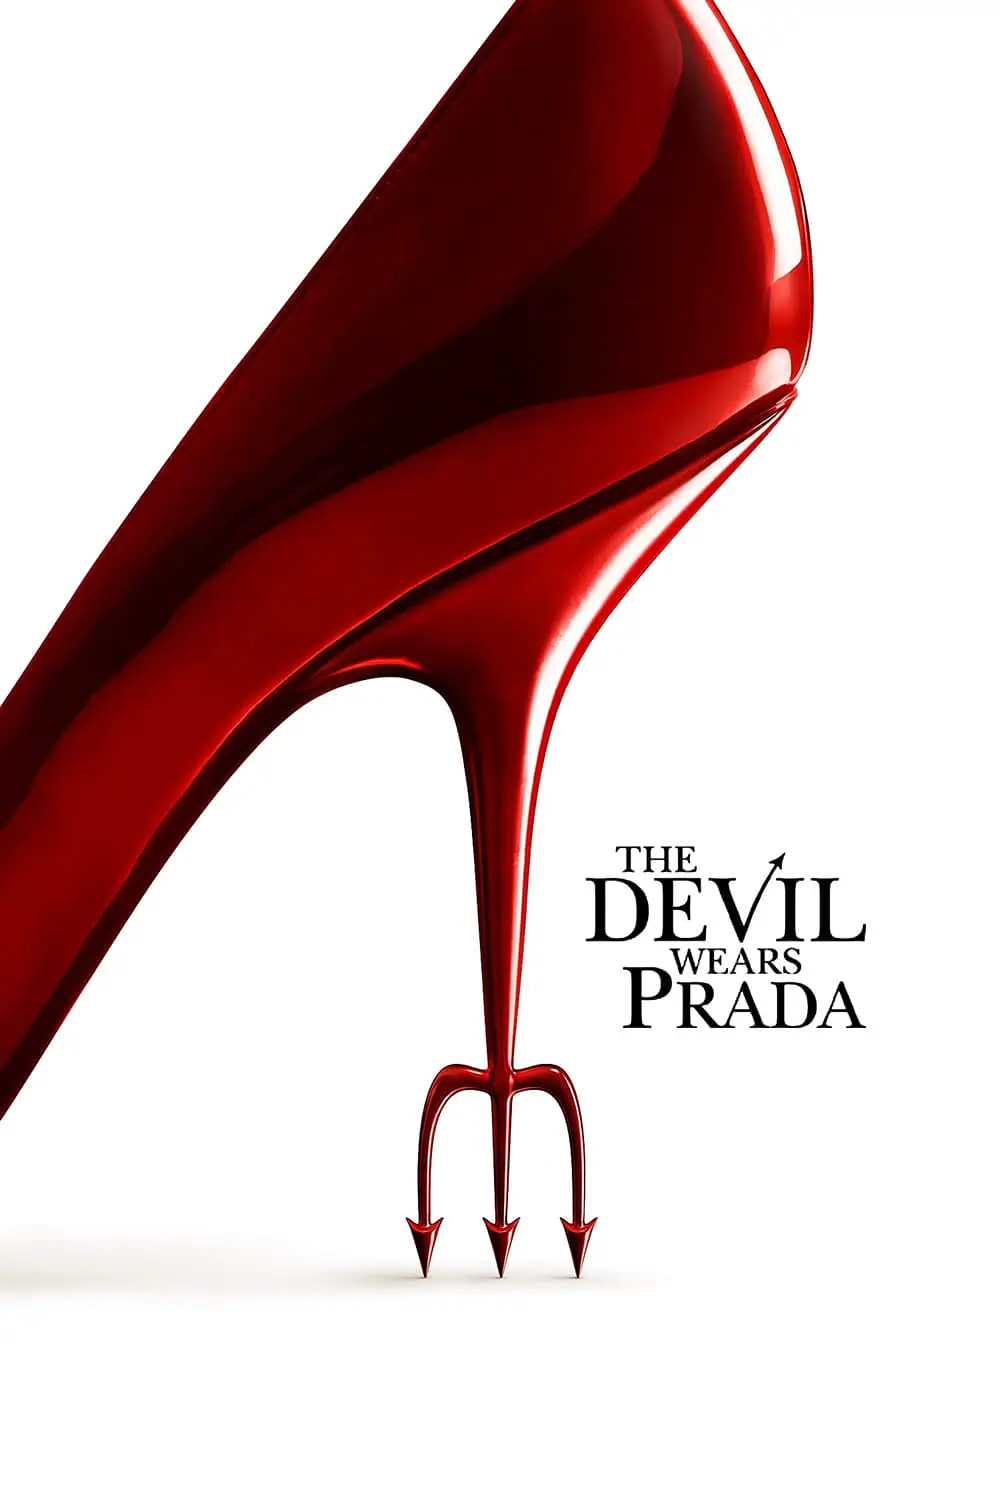 You are currently viewing The Devil Wears Prada